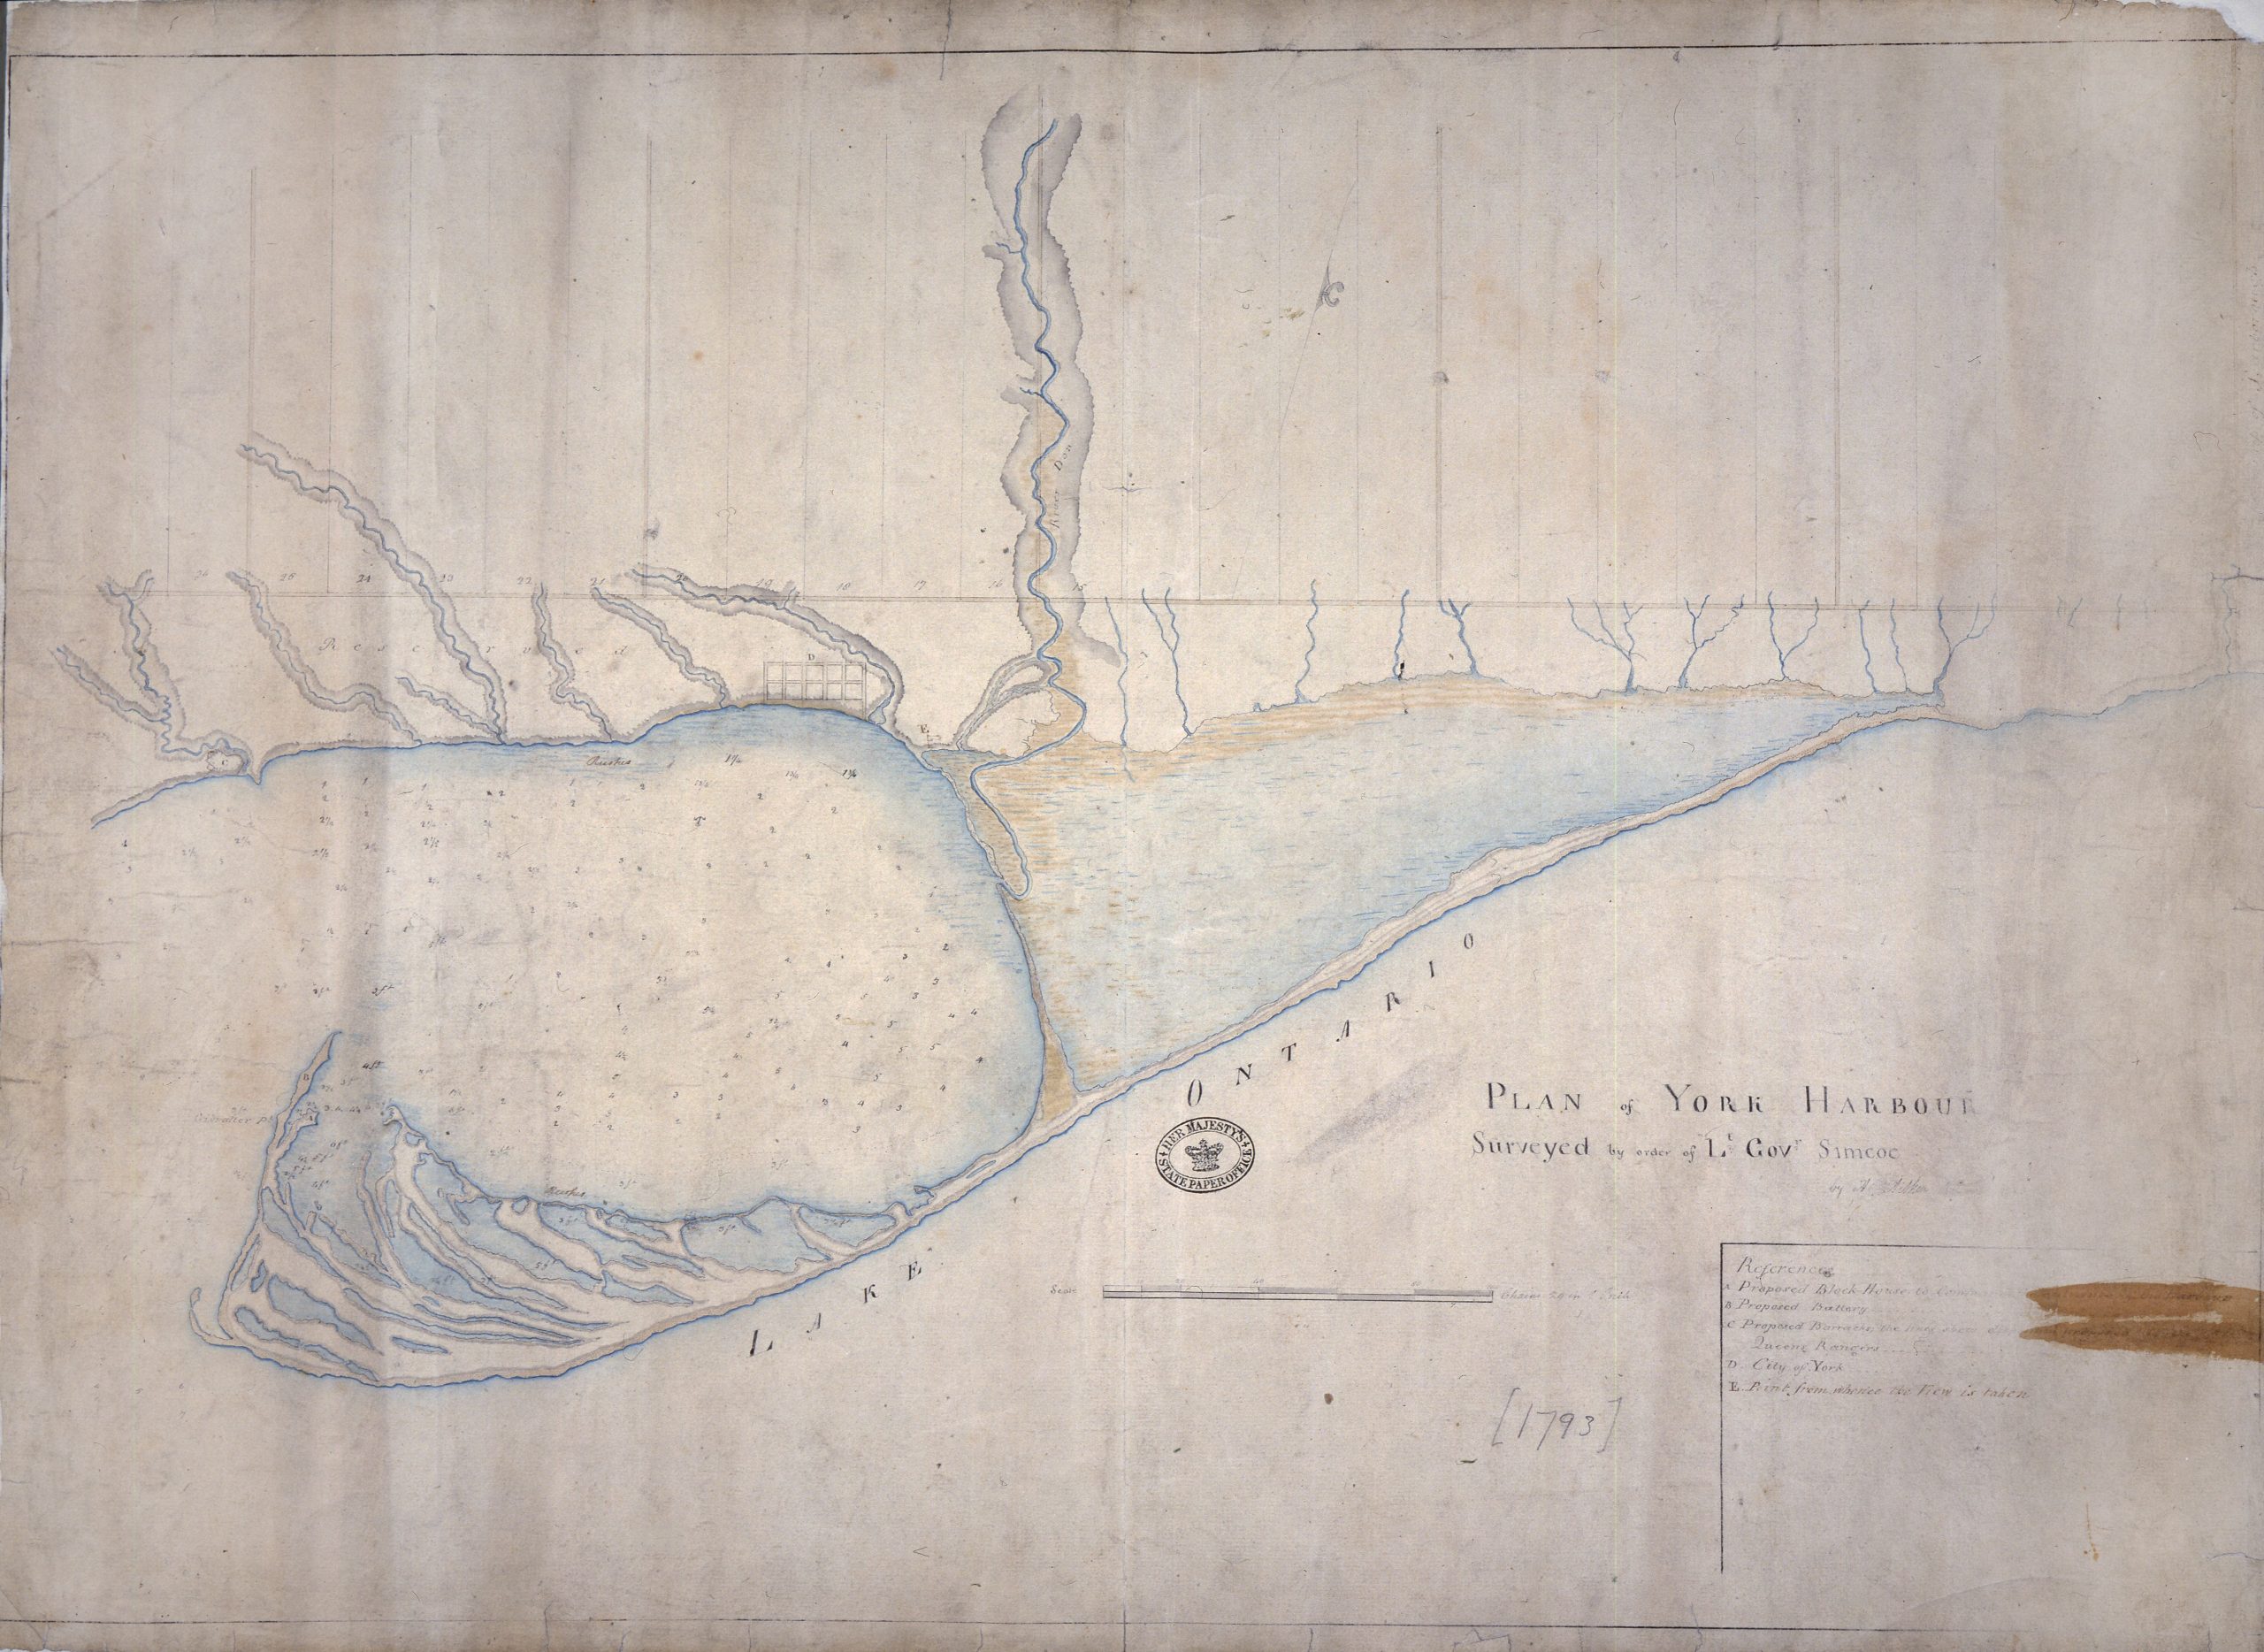 The earliest known map of Toronto Harbour was created by Alexander Aitken by order of Lt Gov Simcoe in 1793